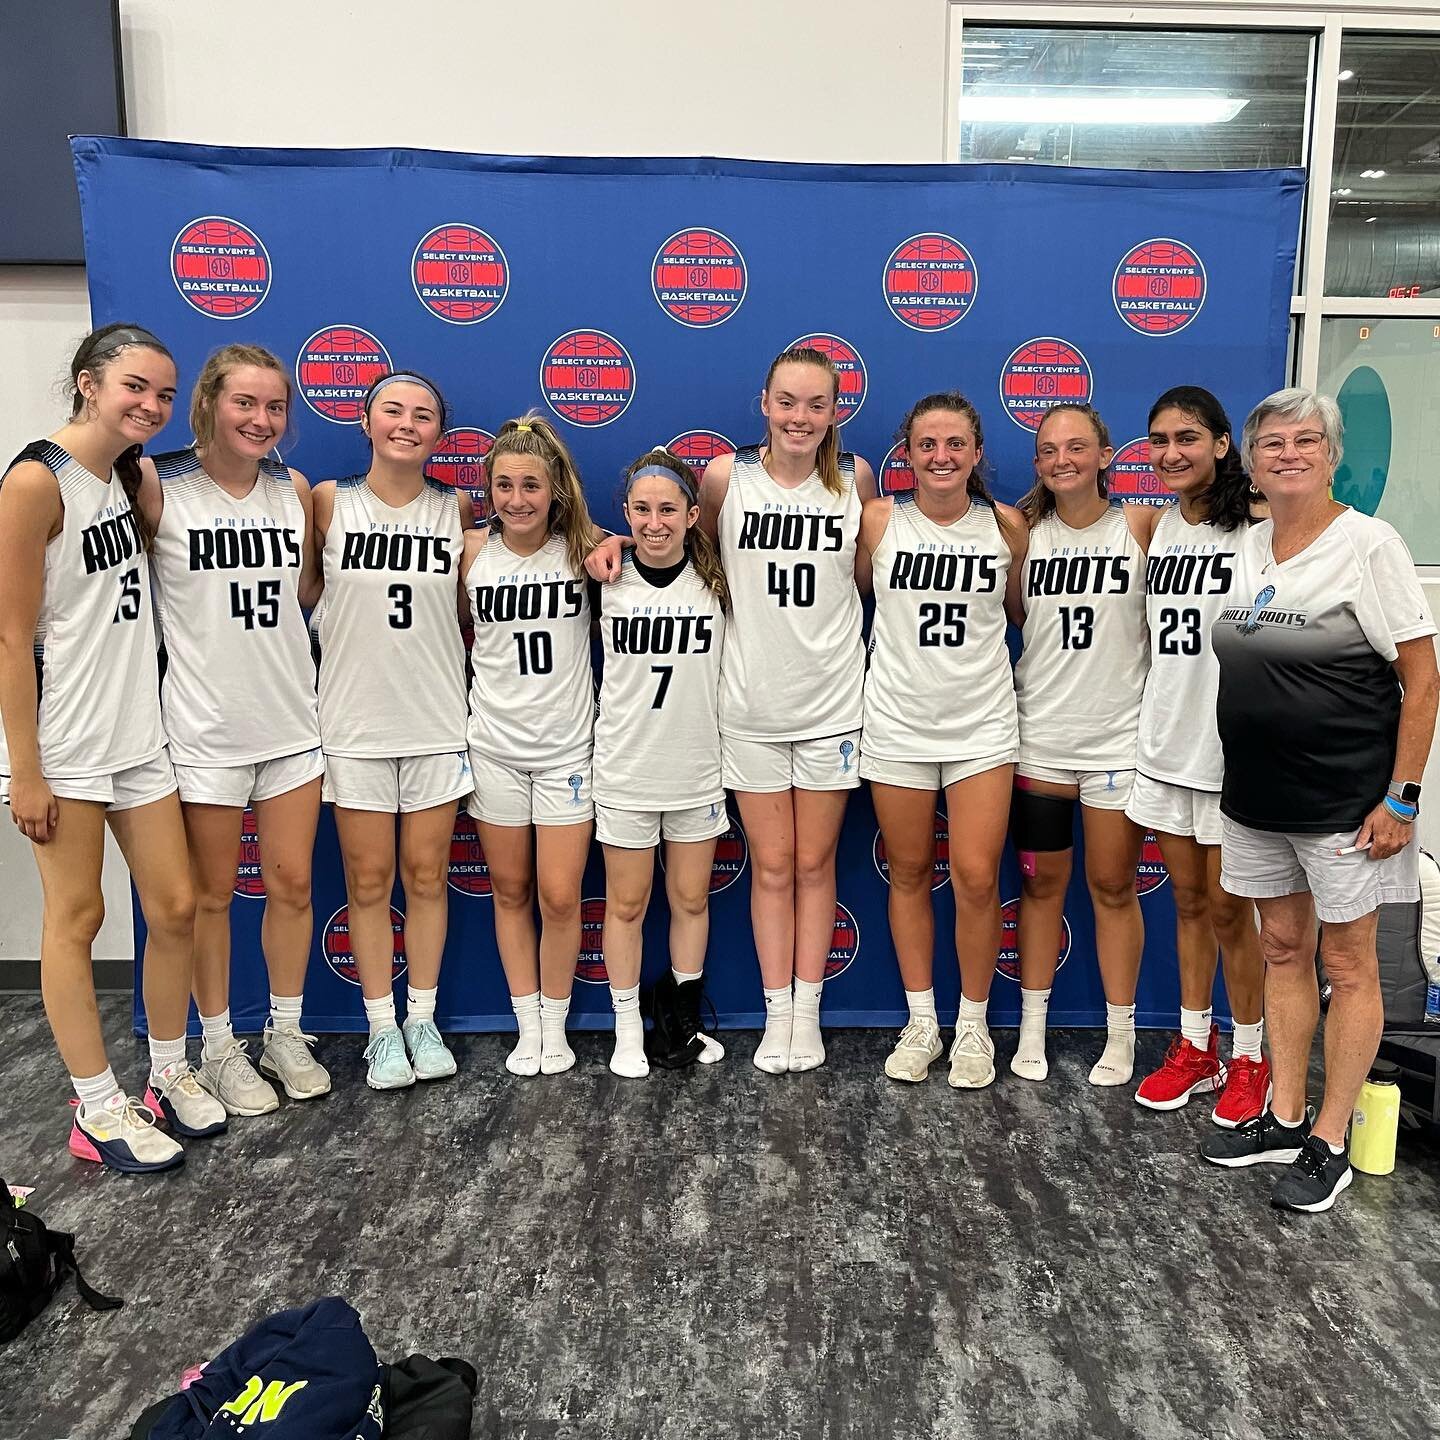 Shout 🗣 out to @phillyrootsbasketball 11th grade! Team went 4-1 at the East Coast Classic at Spooky Nook! Way to go Roots 💪💪 #putdownroots #phillyrootsbasketball #girlsbasketball #auubasketball